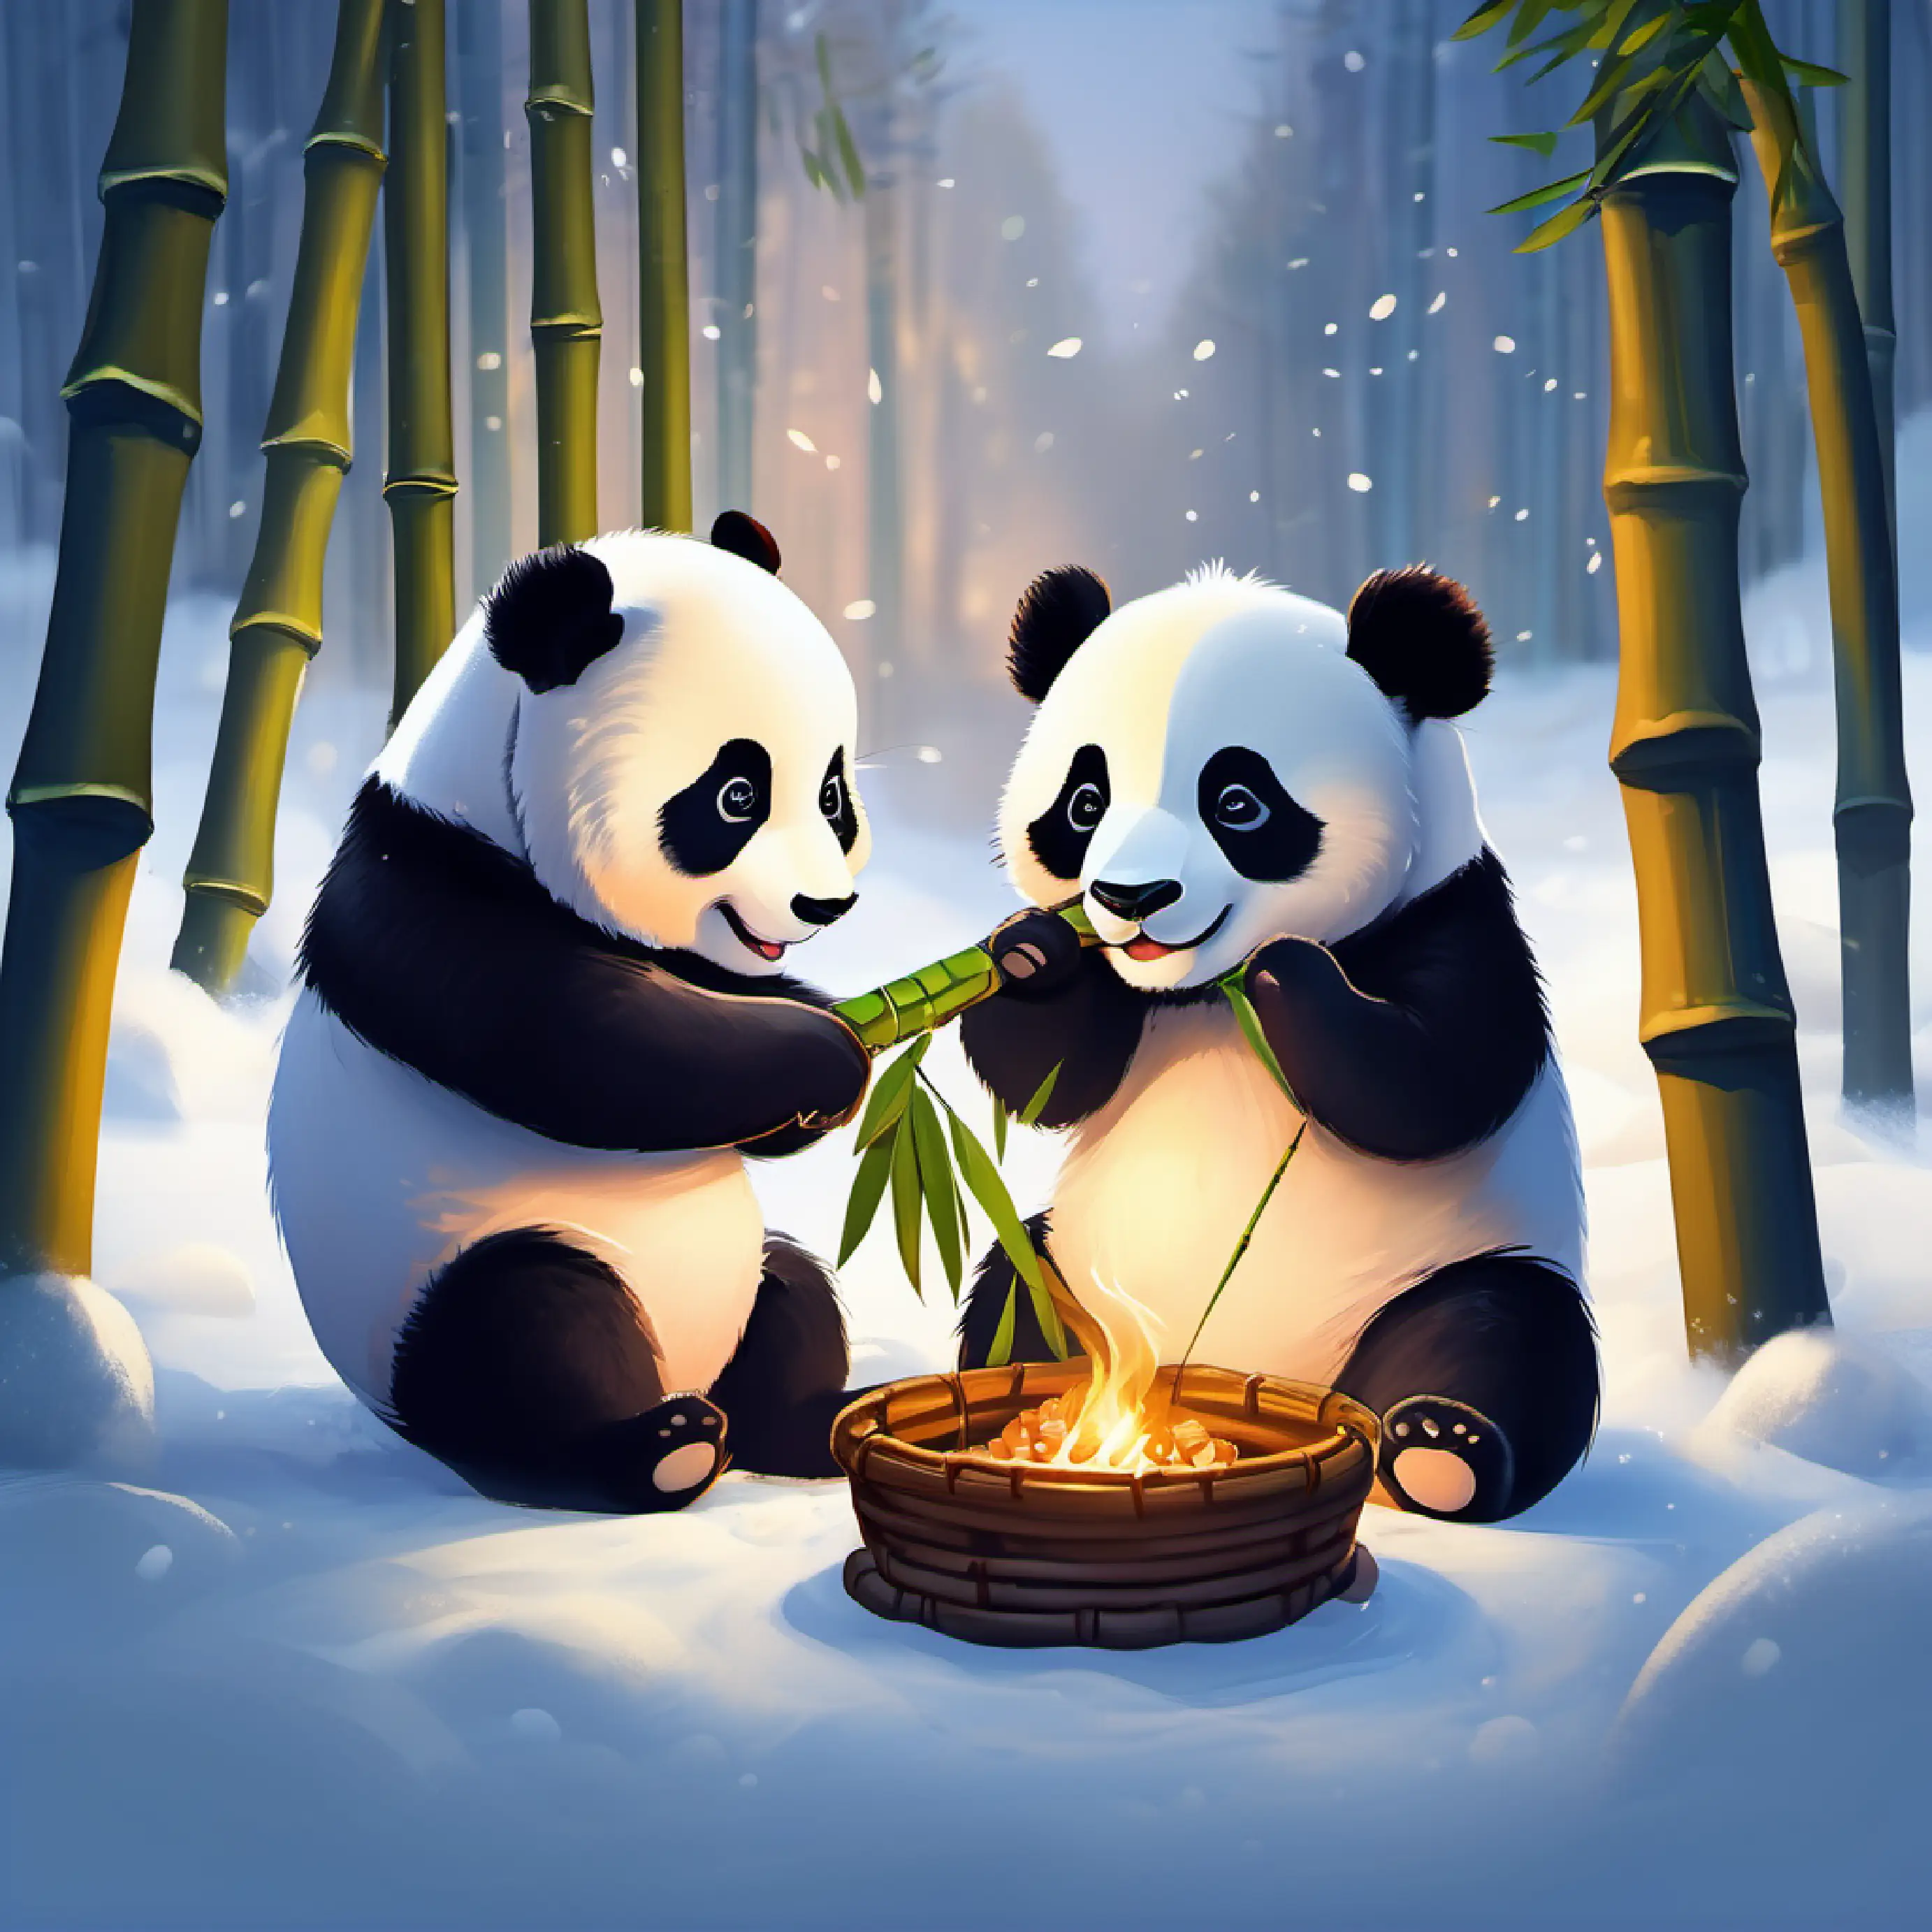 Baby pandas sharing a bamboo feast, experiencing friendship and harmony amidst the serene winter scene.